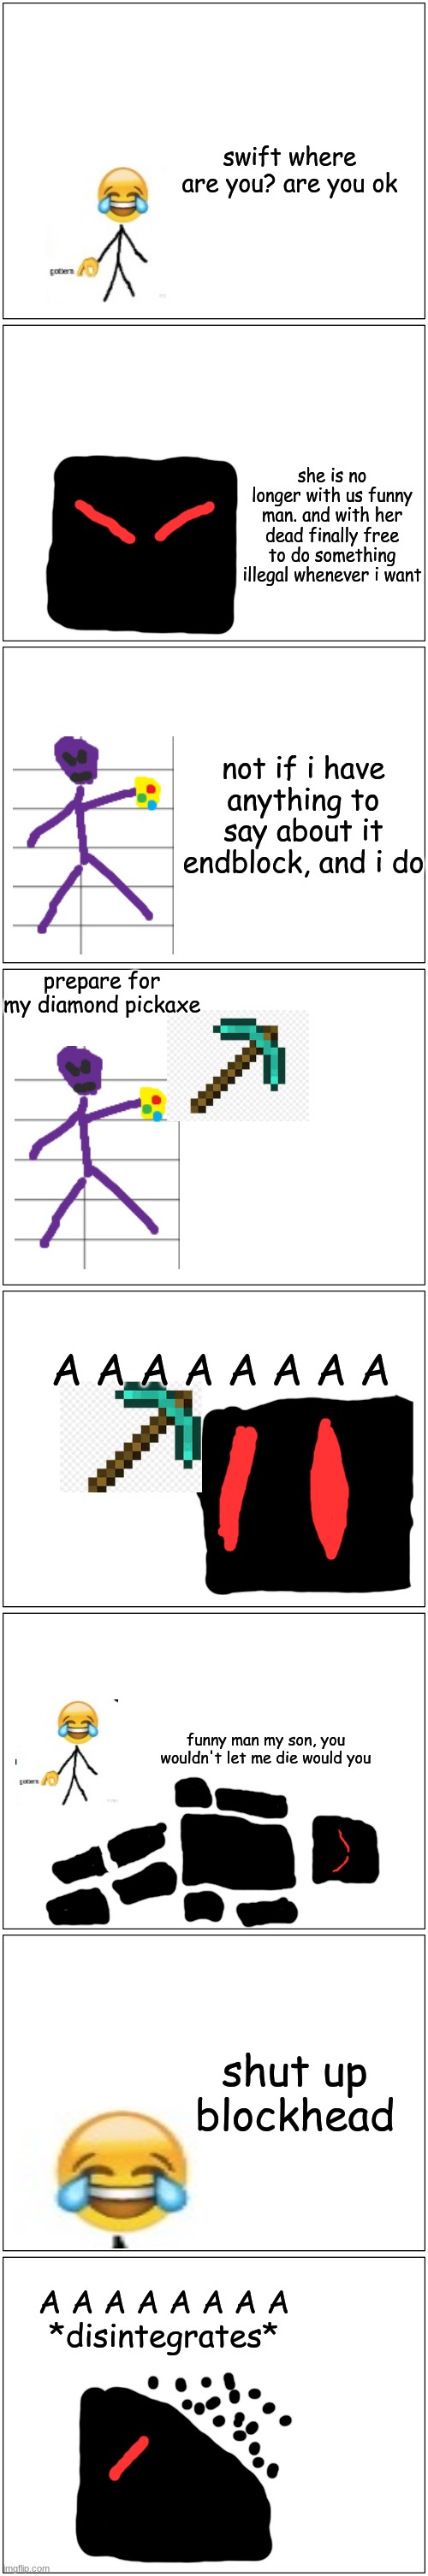 Dumb comic part 2 | swift where are you? are you ok; she is no longer with us funny man. and with her dead finally free to do something illegal whenever i want; not if i have anything to say about it endblock, and i do; prepare for my diamond pickaxe; A A A A A A A A; funny man my son, you wouldn't let me die would you; shut up blockhead; A A A A A A A A
*disintegrates* | image tagged in memes,blank comic panel 1x2 | made w/ Imgflip meme maker